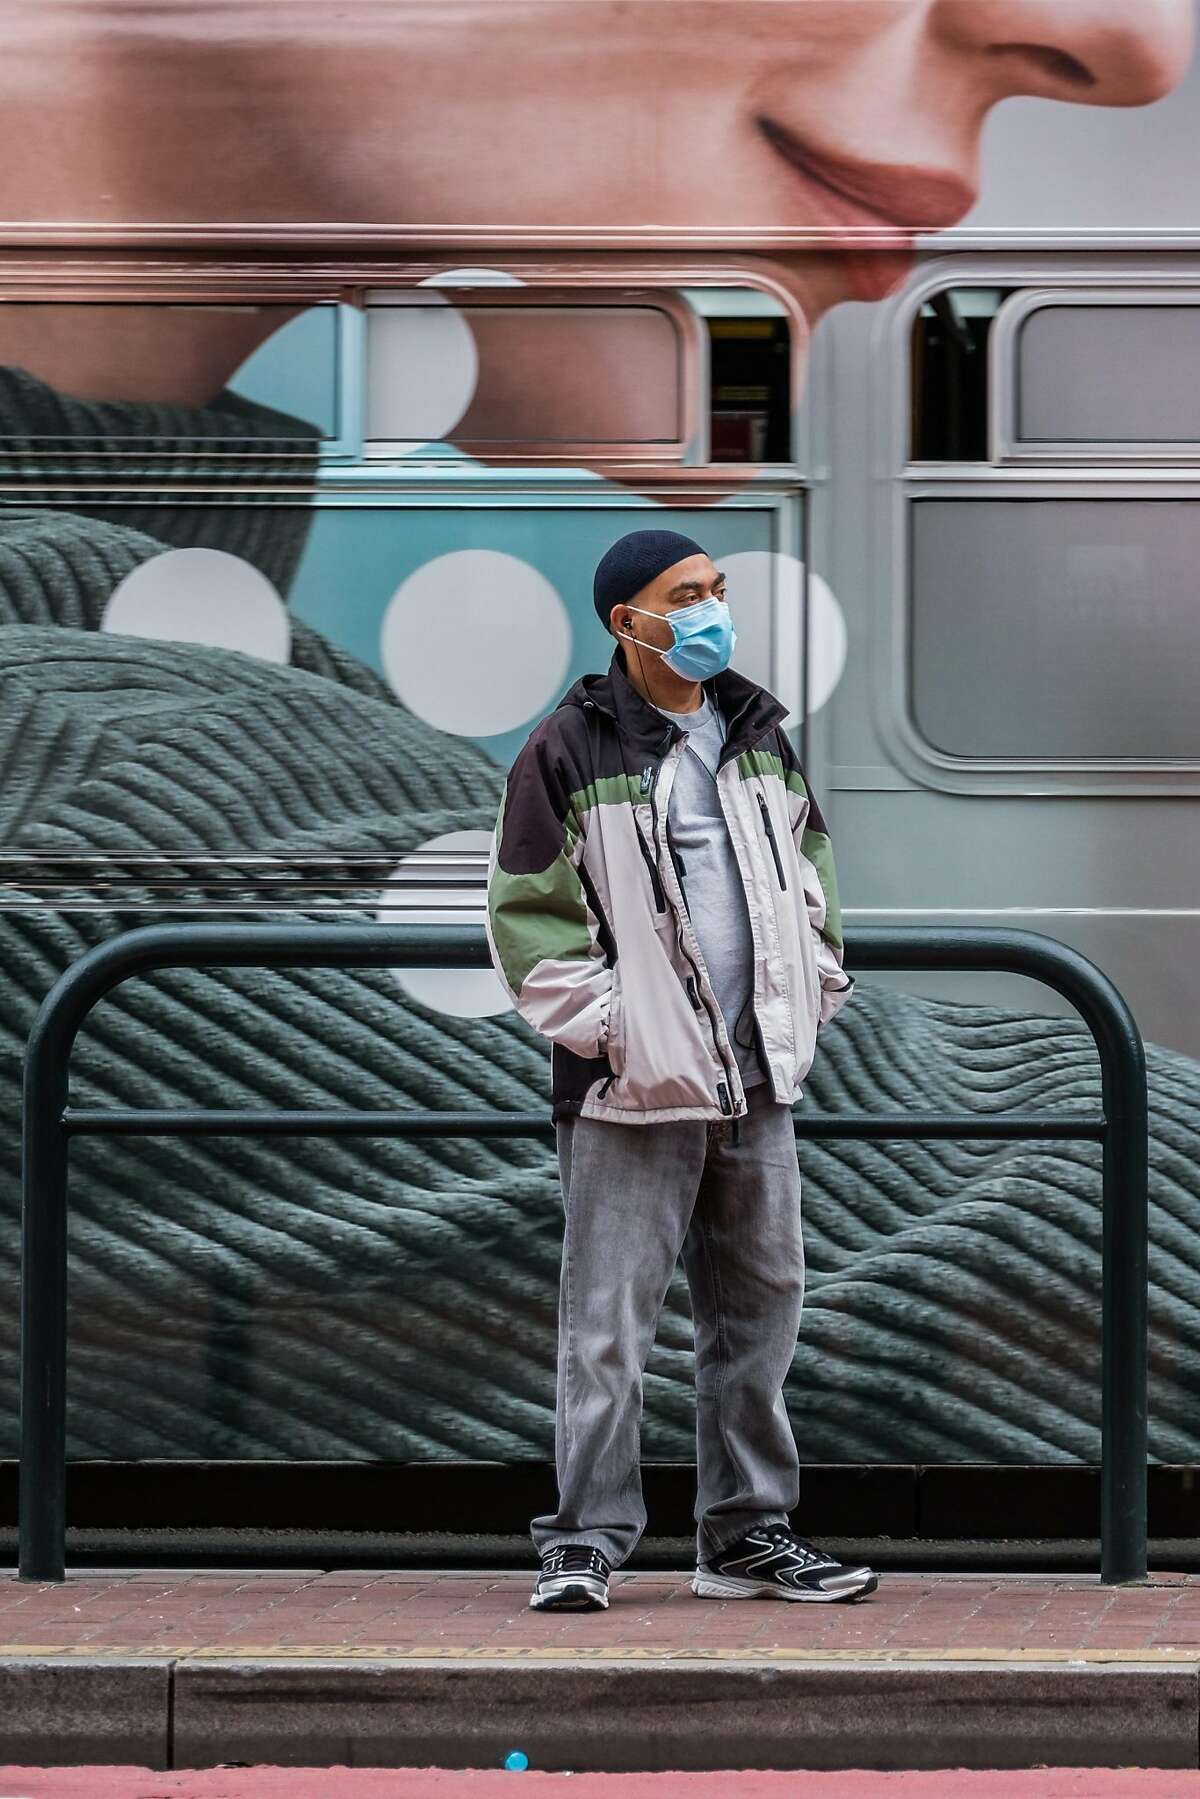 A passenger waits for a bus while another bus passes behind him in San Francisco, Calif. on Thursday April 16, 2020.